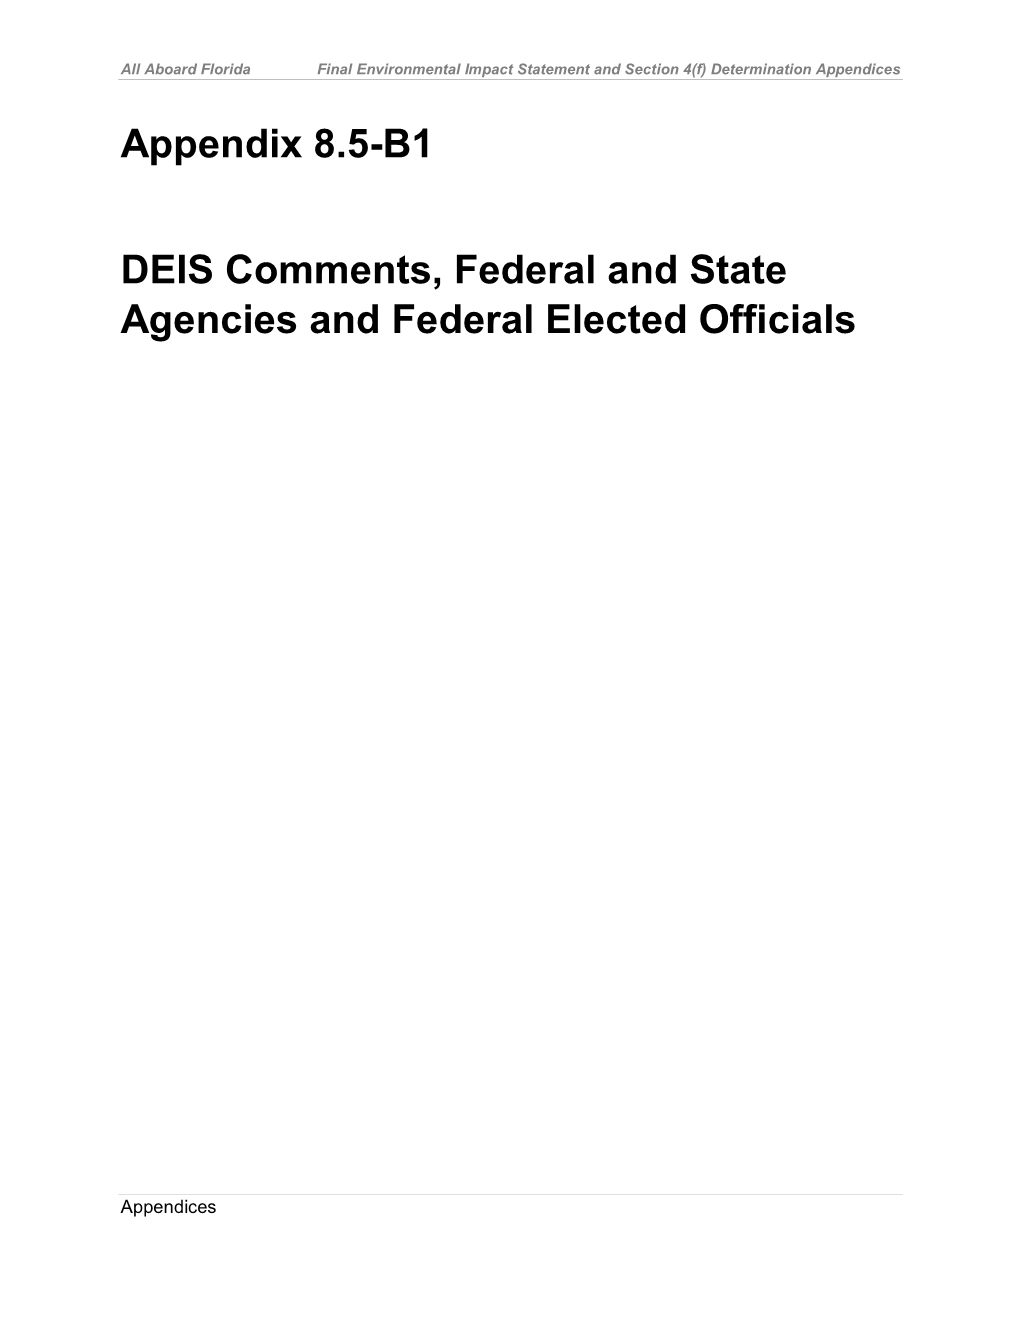 Appendix 8.5-B1 DEIS Comments, Federal and State Agencies And